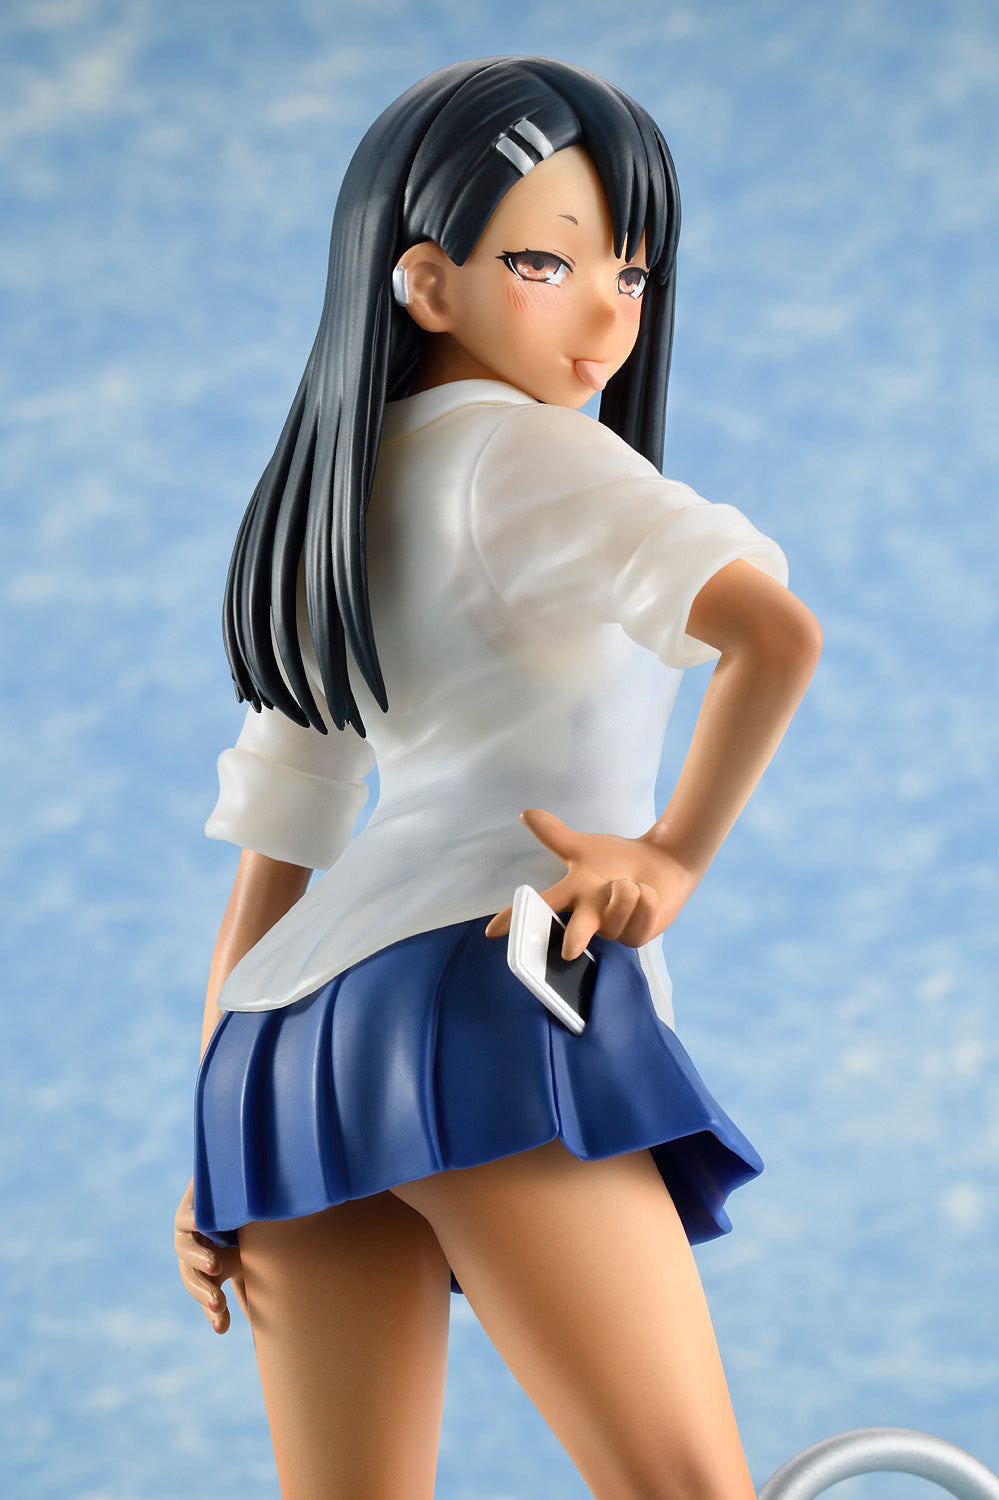 Ijiranaide, Nagatoro-san 2nd Attack - Don't Toy with Me, Miss